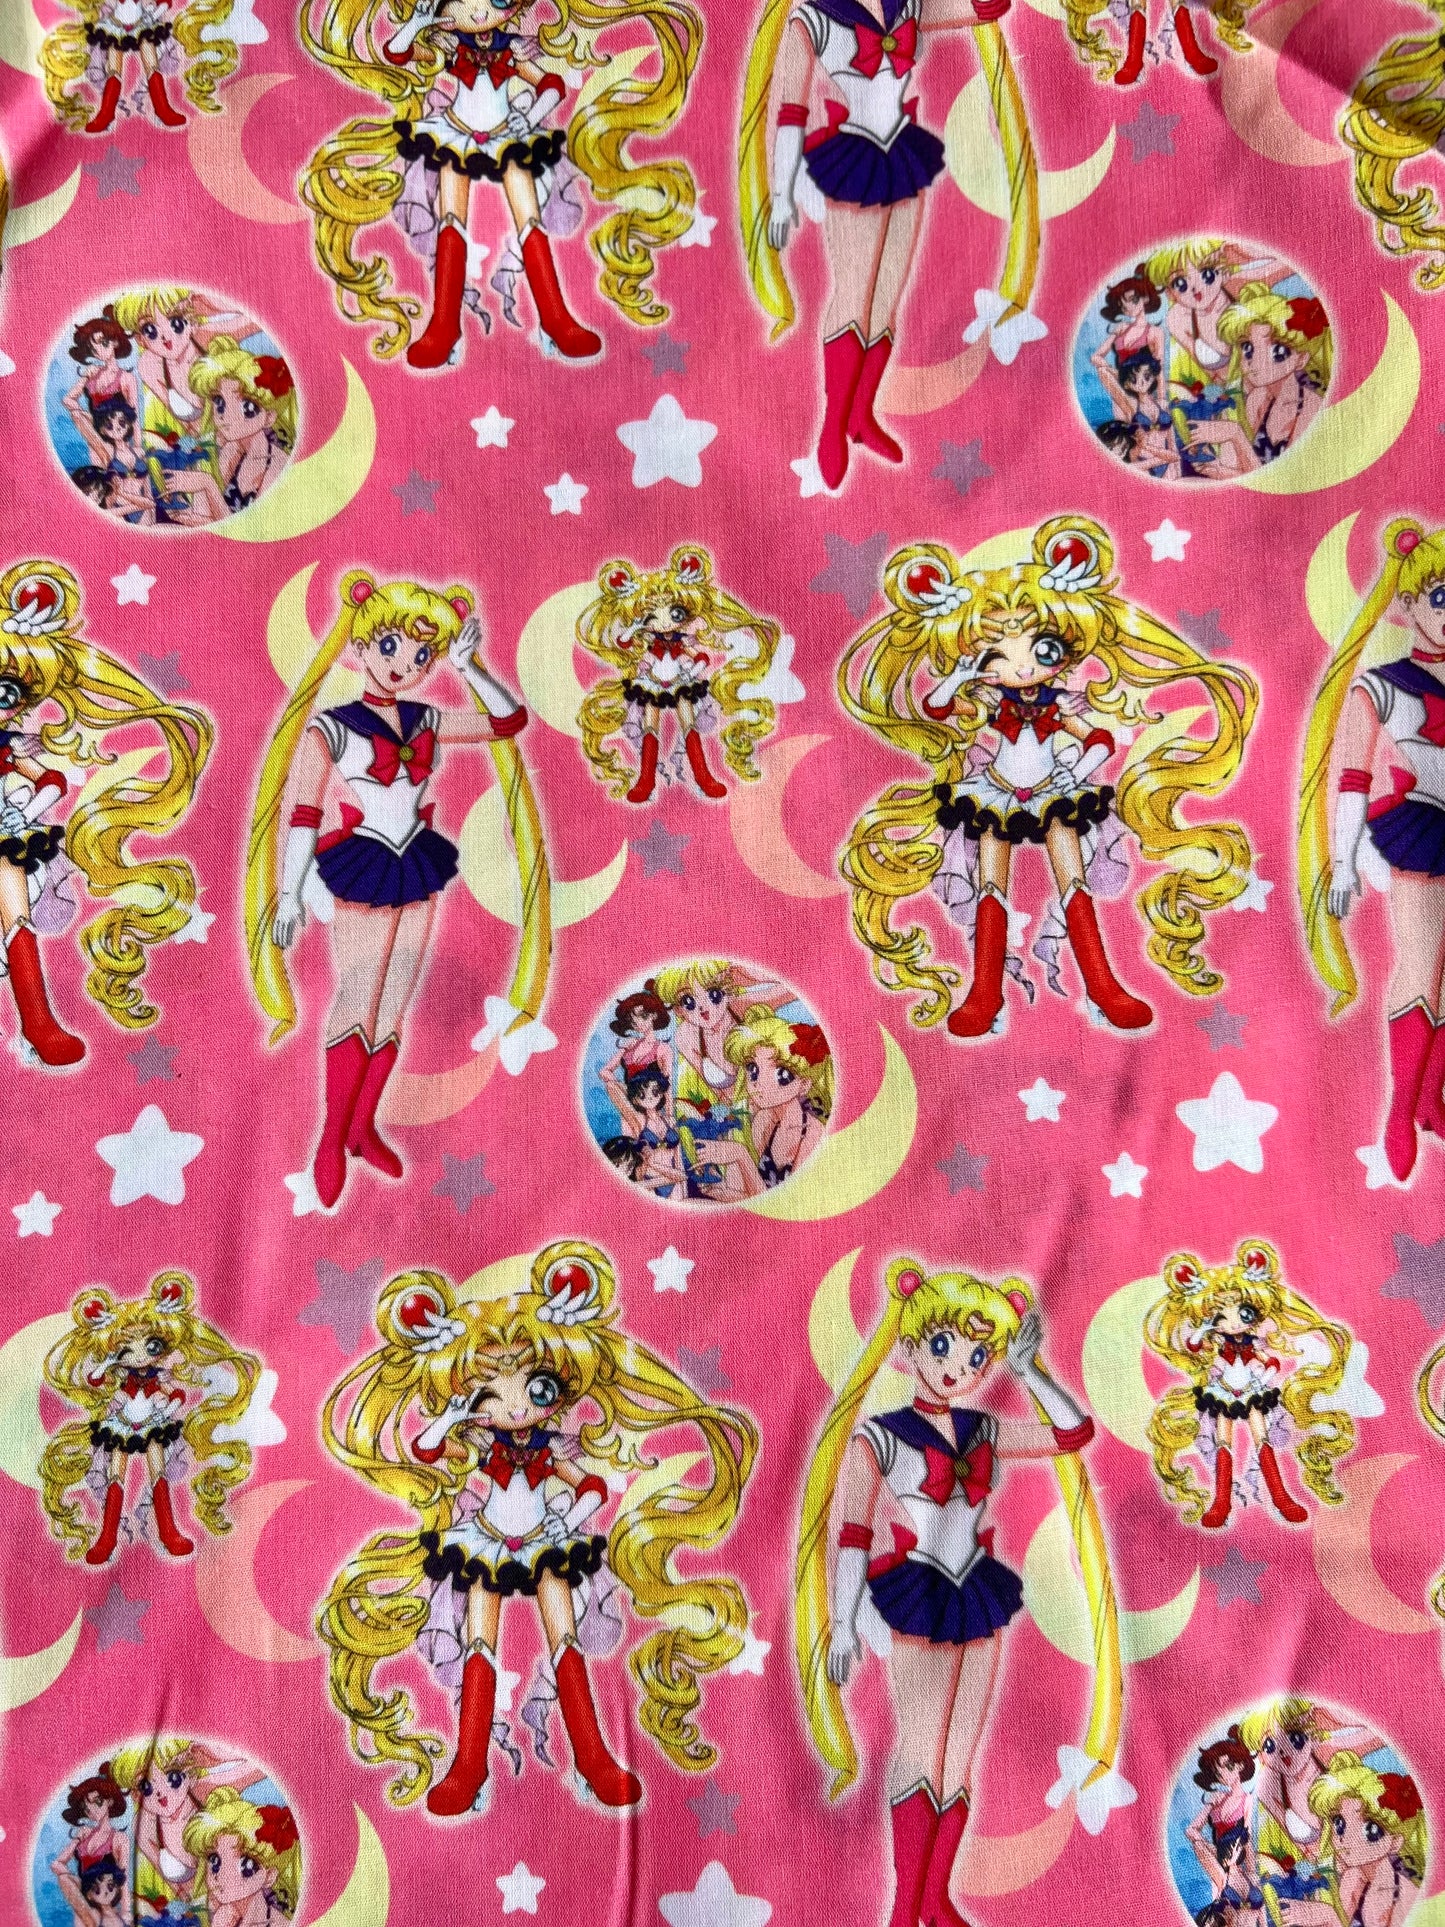 FIGHT EVIL WIN LOVE - Polycotton Fabric from Japan